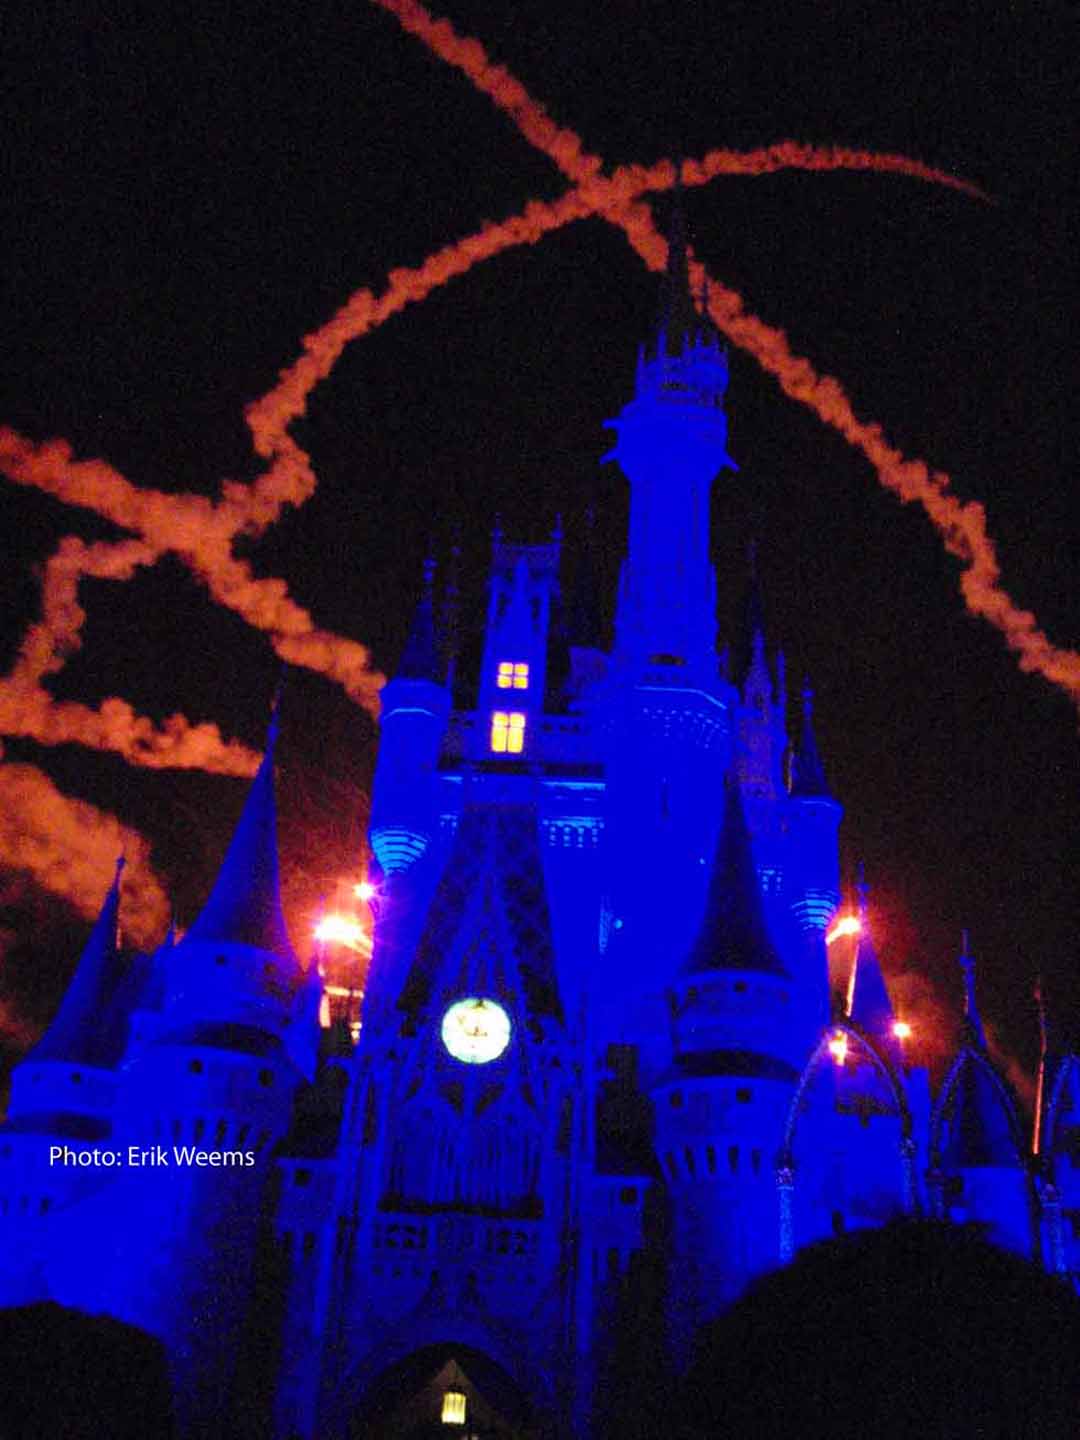 Fireworks in the sky at Walt Disney World in FLorida